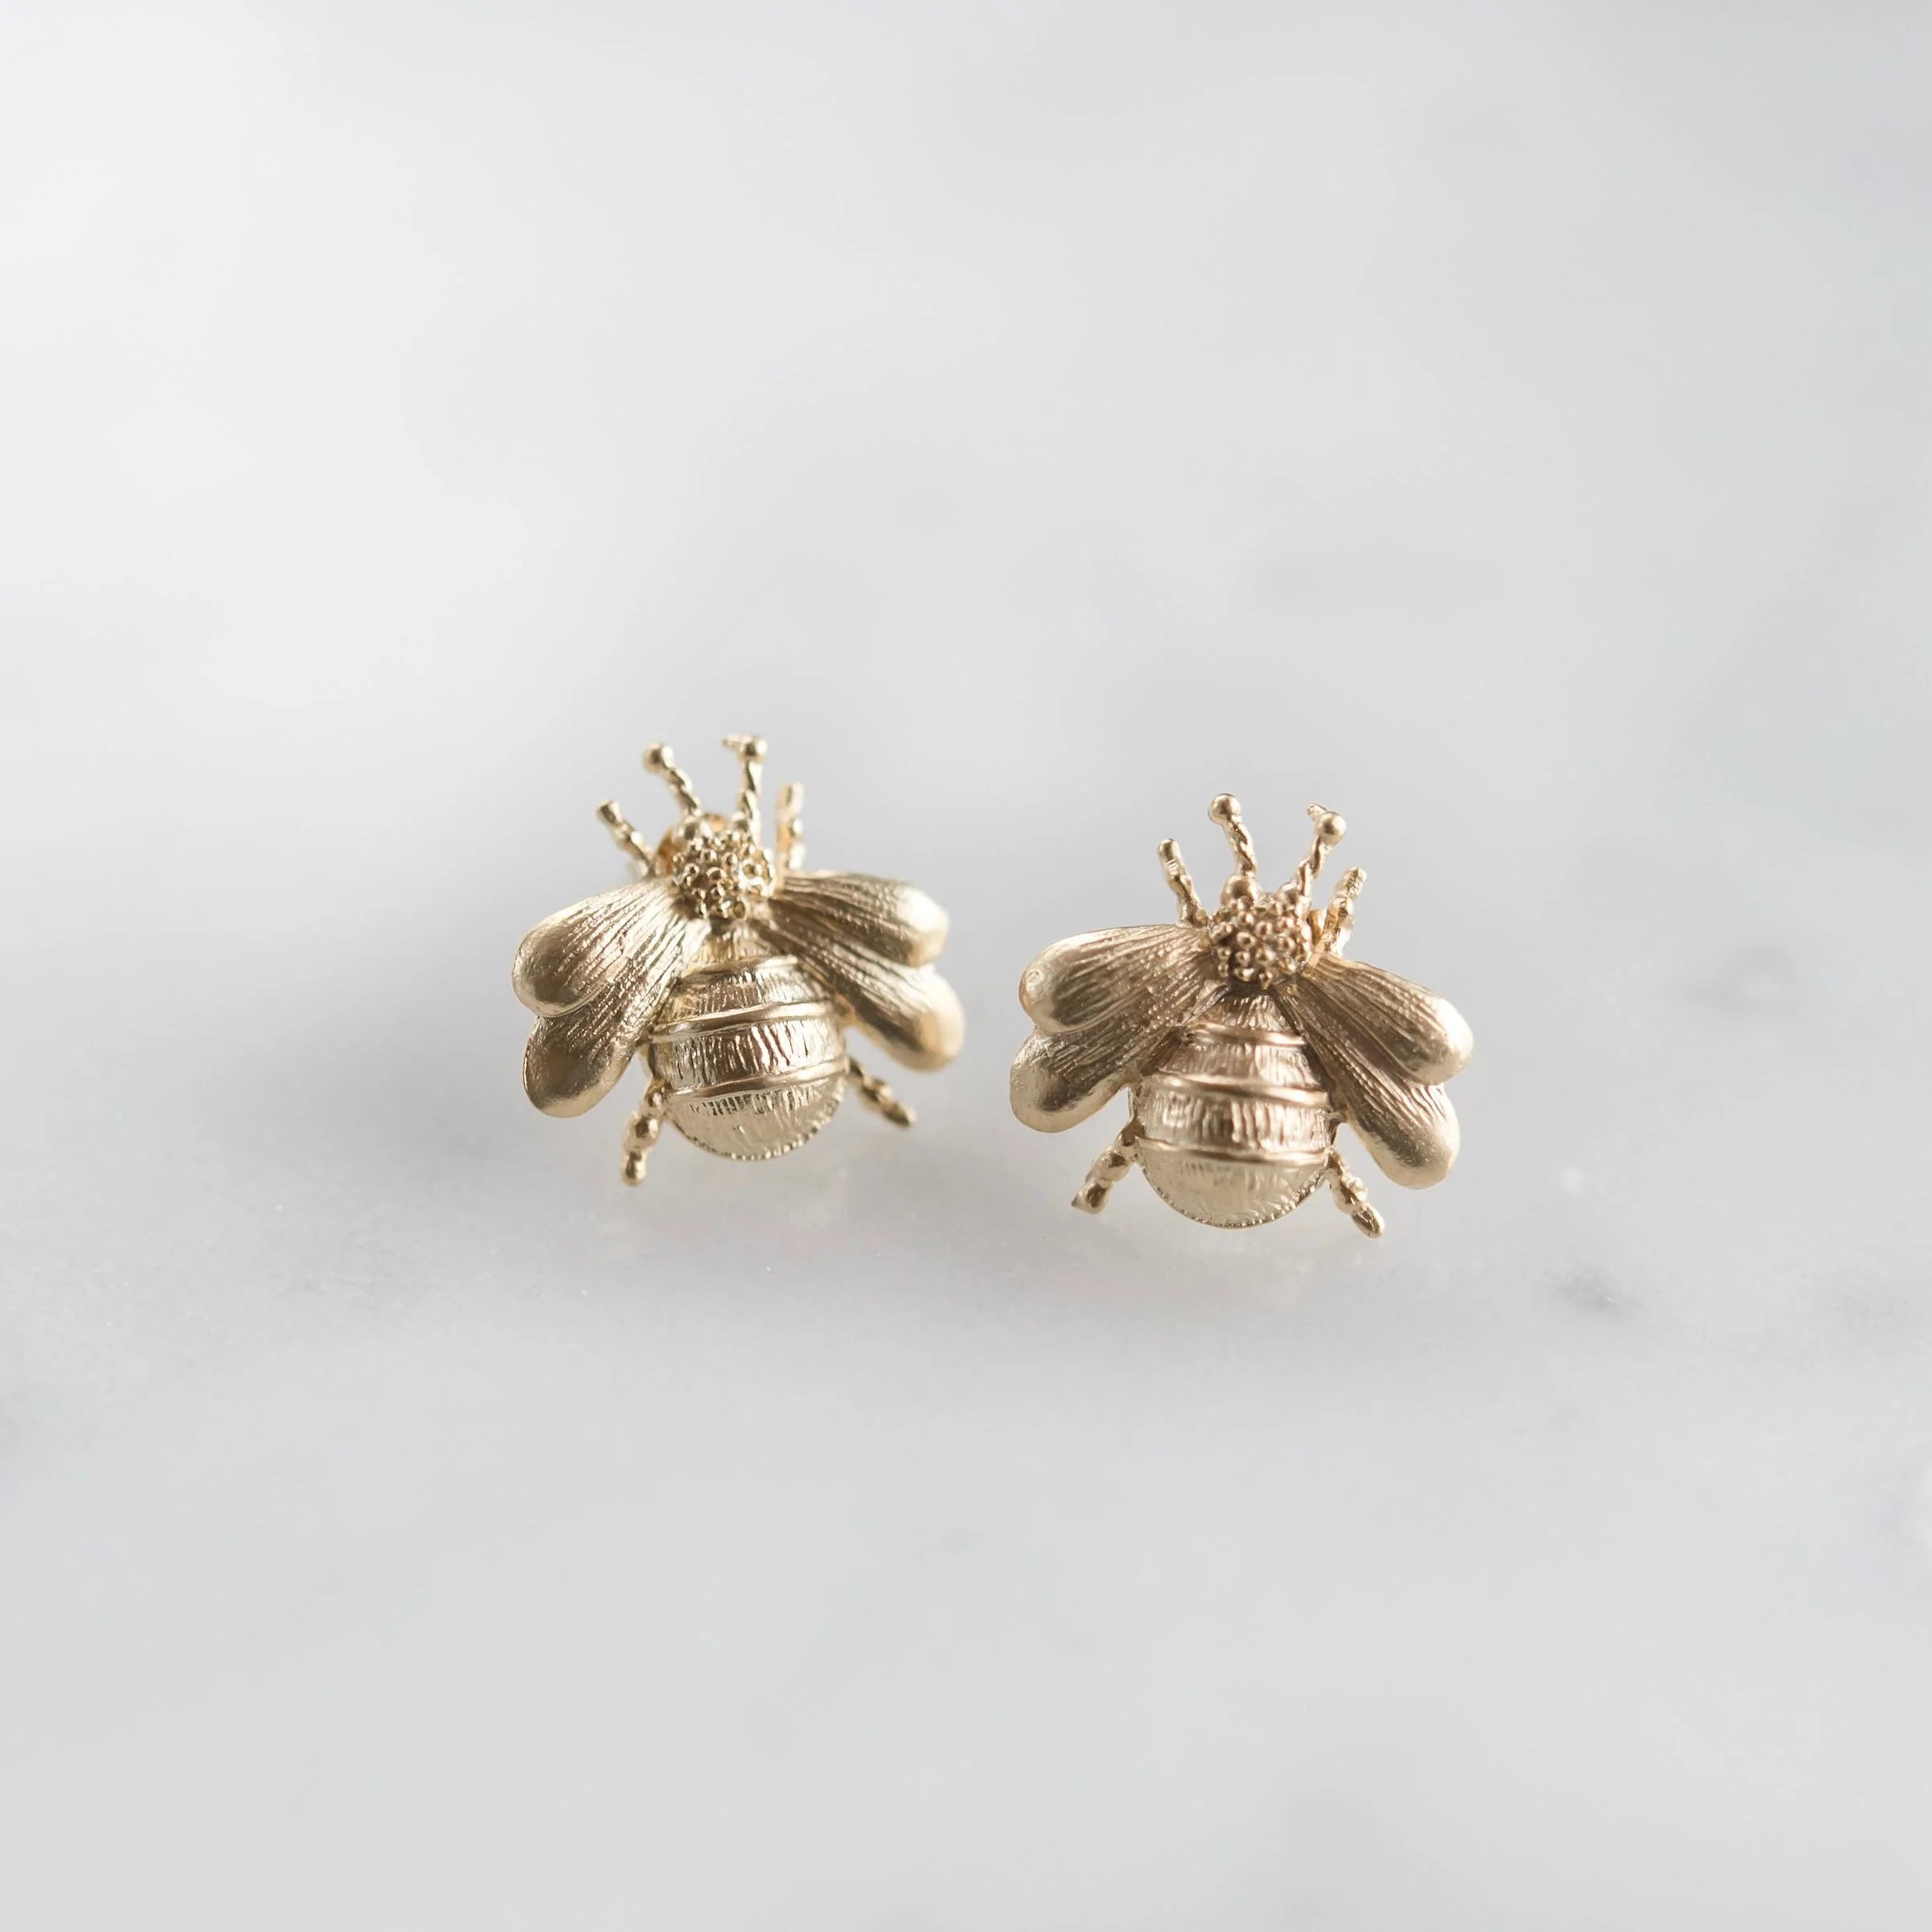 Shop For Gold and Silver Bee Earrings  Beehive Shoppe